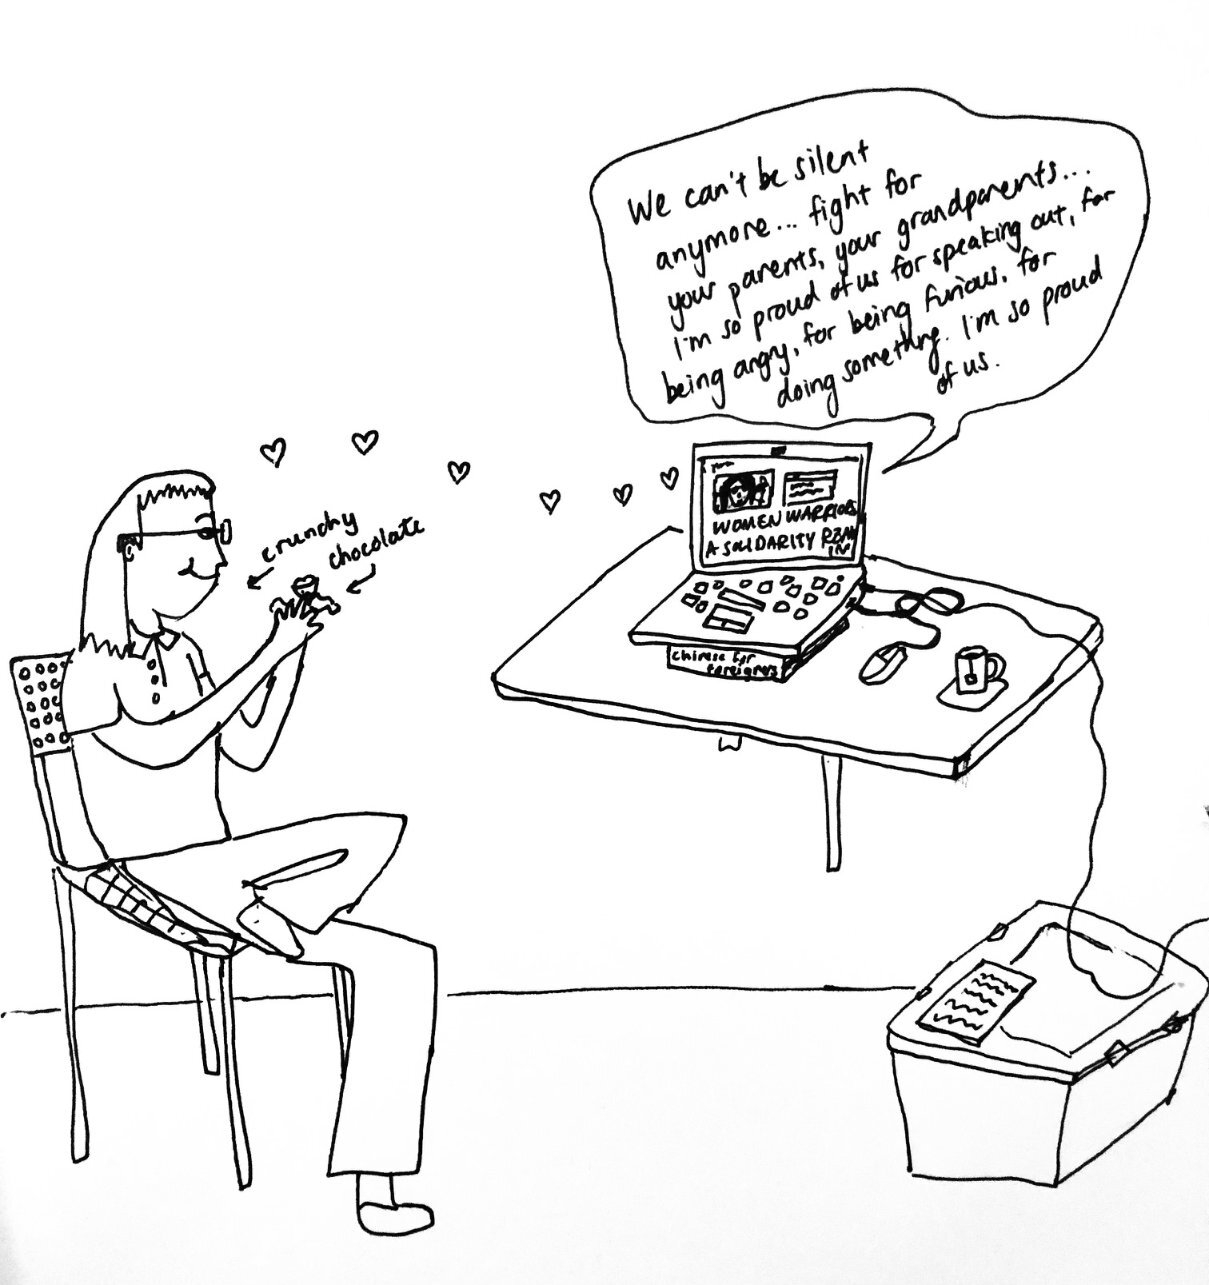 An illustration showing a woman at her desk looking at her computer while eating chocolate. There is a word bubble coming from the computer that says, "we can't be silent anymore... fight for your parents, your grandparents... I'm so proud of us for being furious. For doing something. I'm so proud of us."